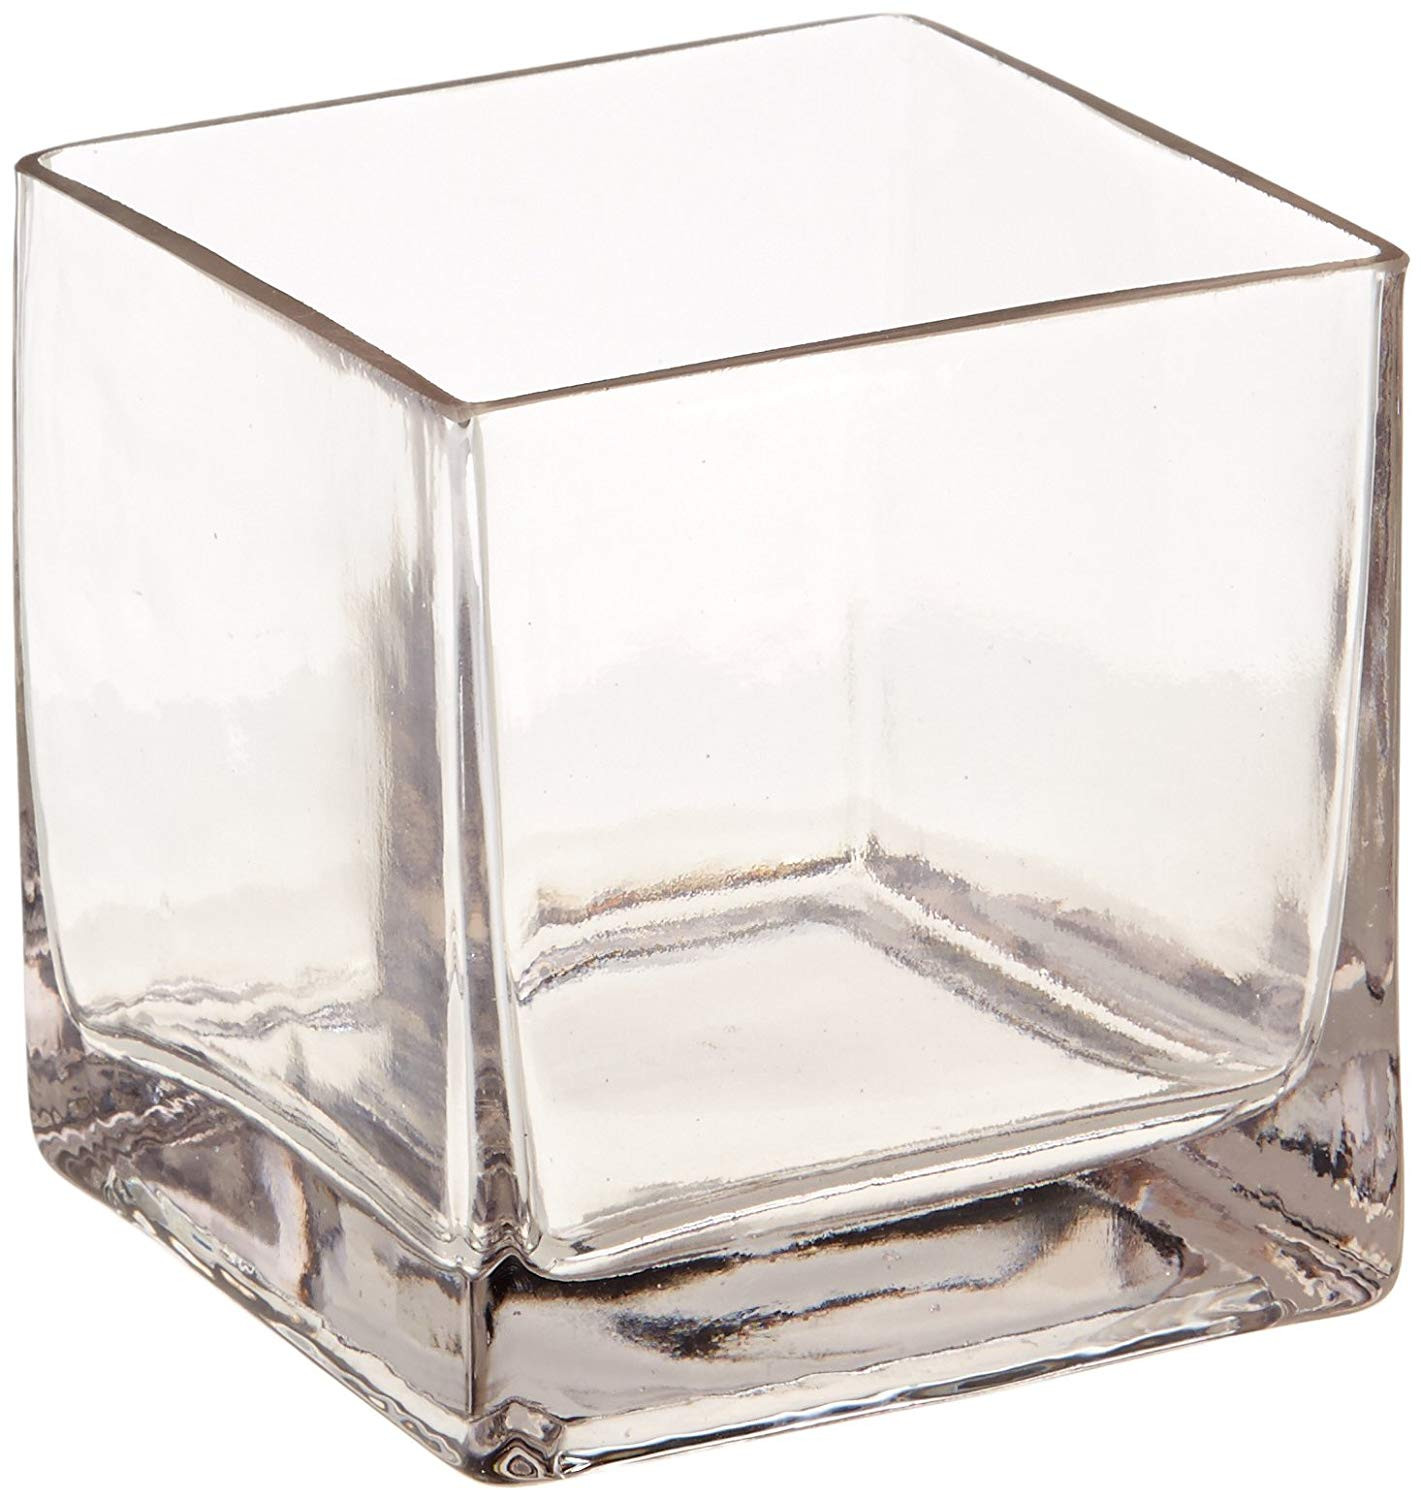 24 Lovely 6 Inch Glass Cube Vase 2024 free download 6 inch glass cube vase of amazon com 12piece 4 square crystal clear glass vase home kitchen throughout 71 jezfmvnl sl1500